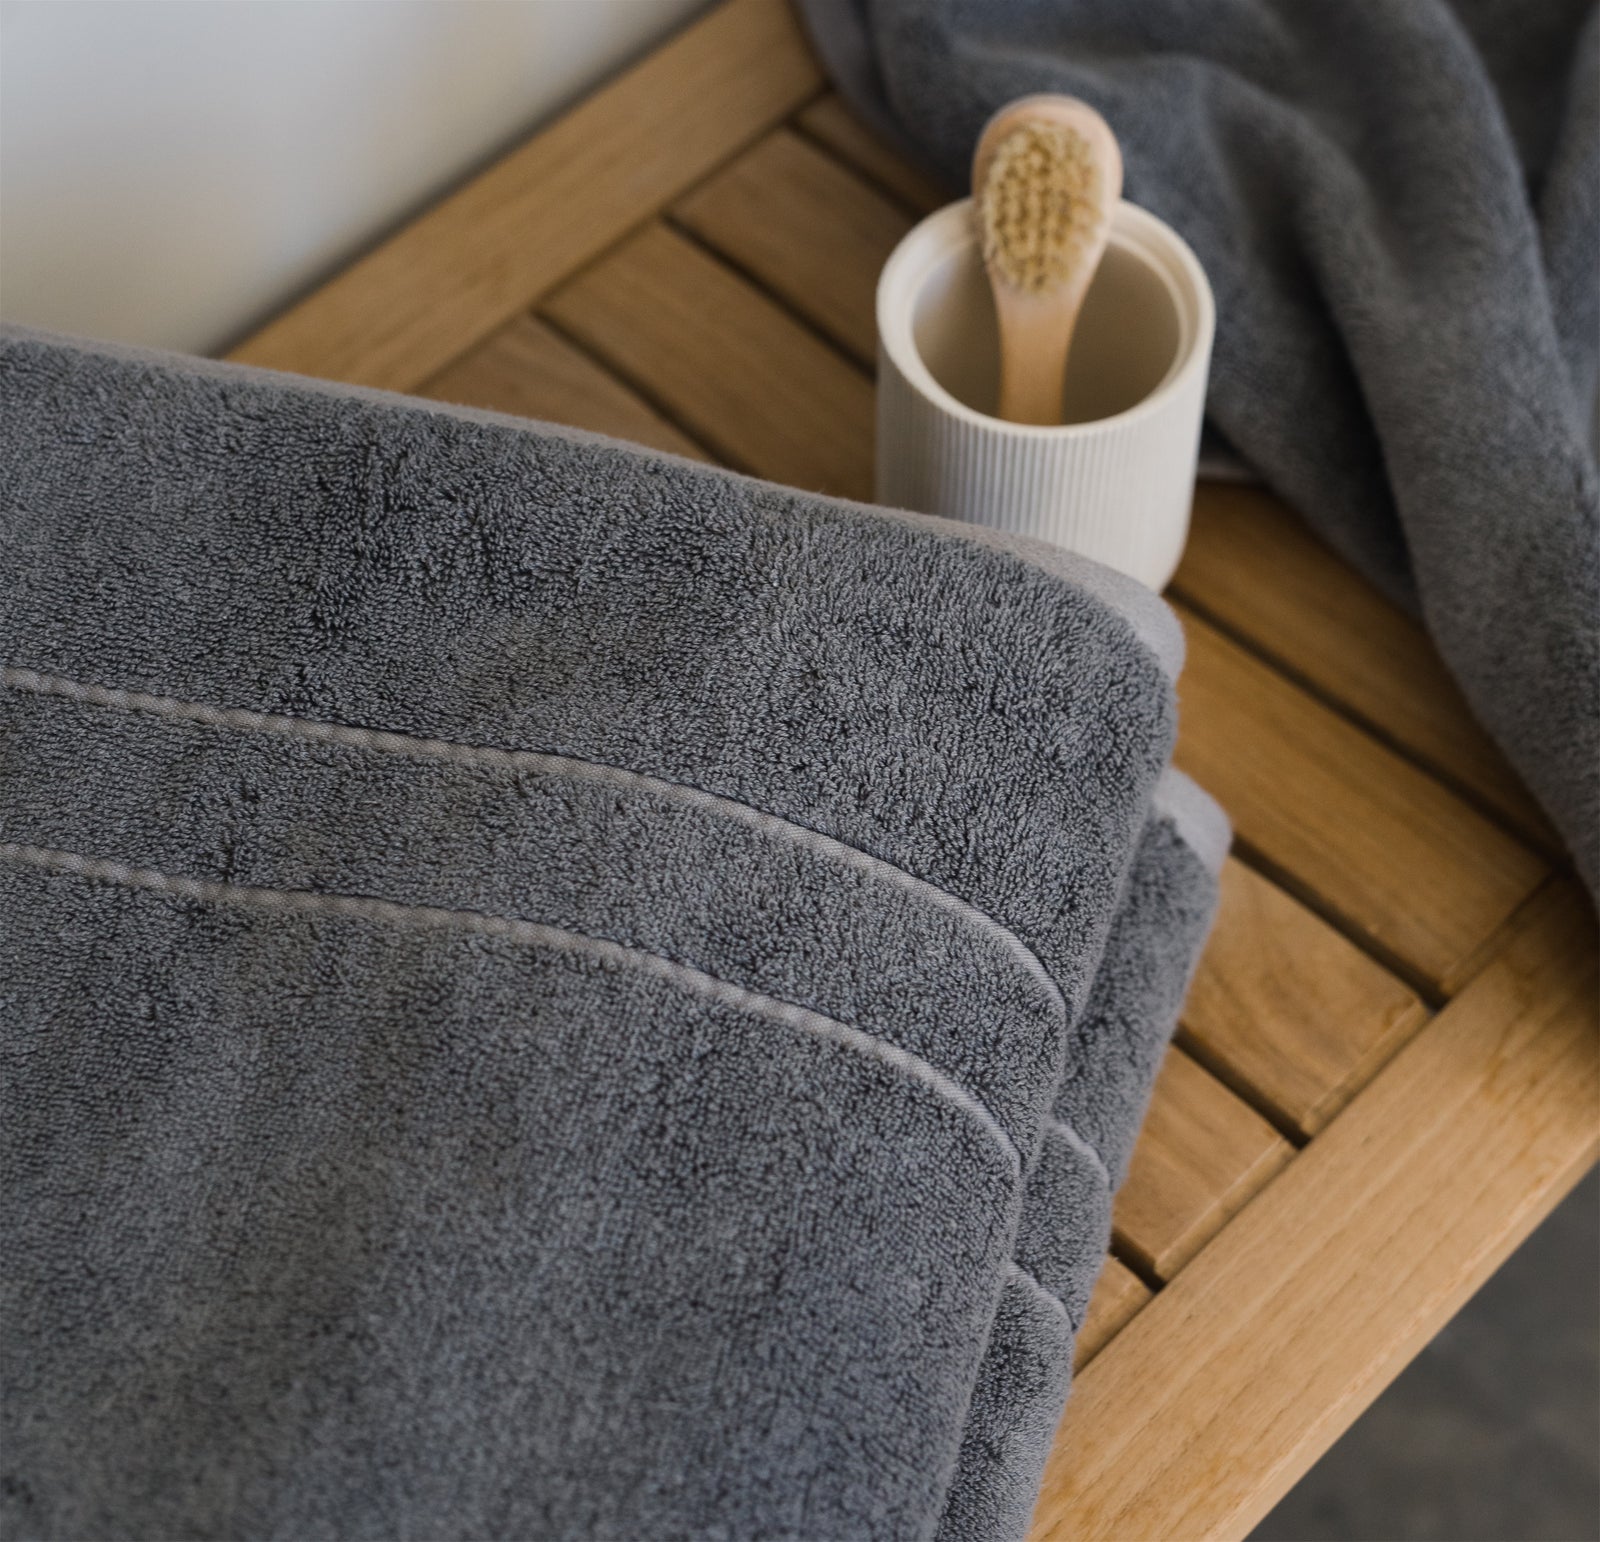 The Premium Plush Bath Sheet are folded on a wooden bench. Bath products are resting on the bench as well. 